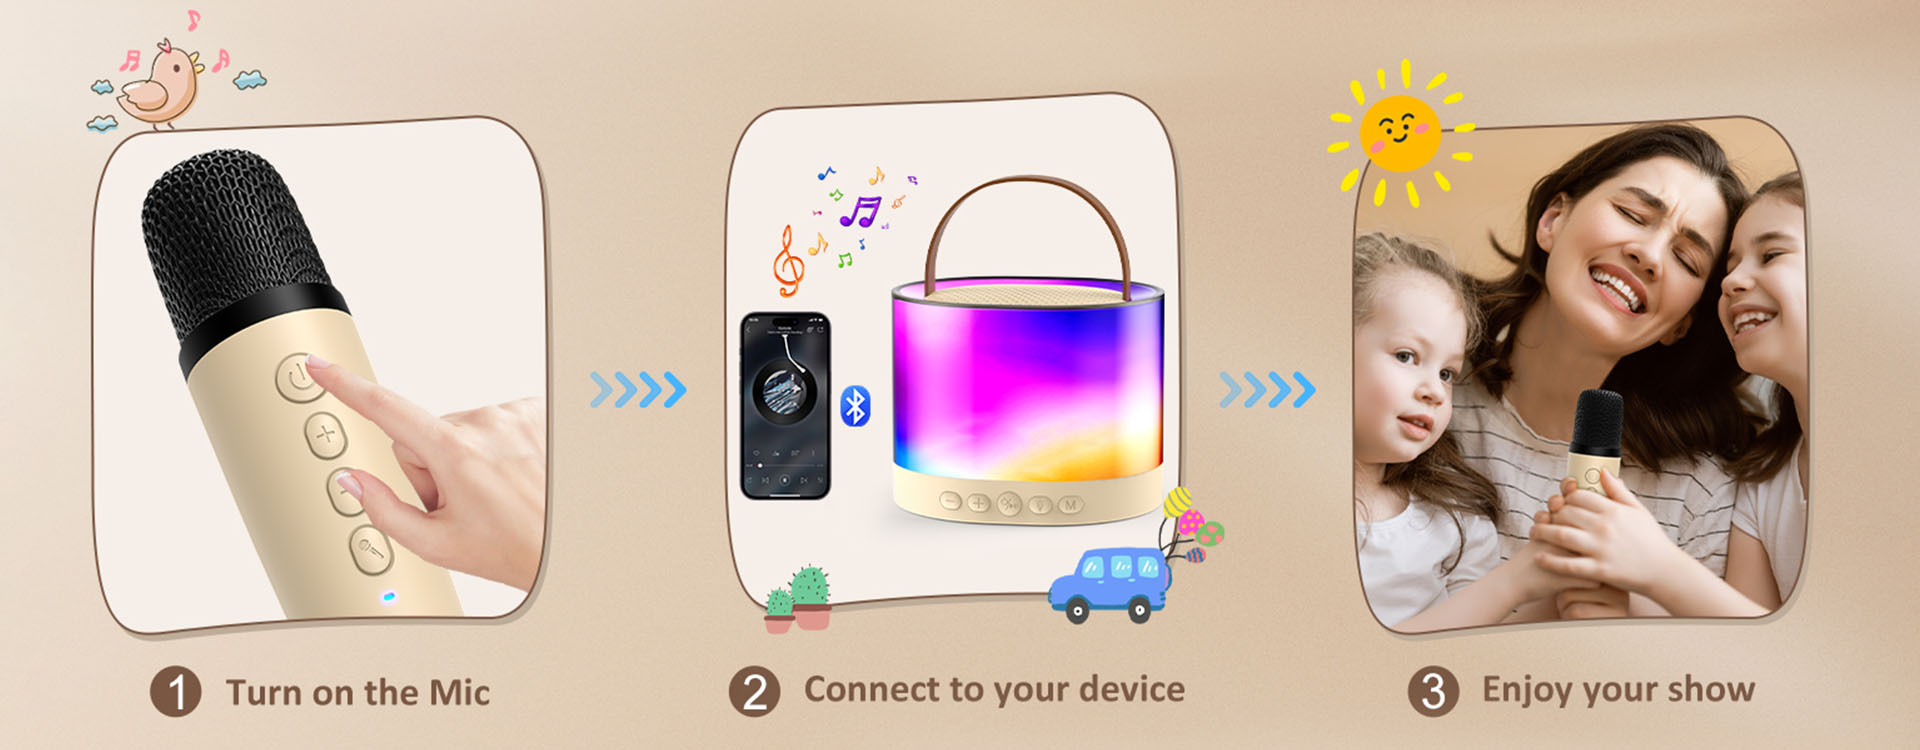 Use JYX D23 in just 2 steps for Mini Karaoke Machine for Kids with Wireless Microphones.